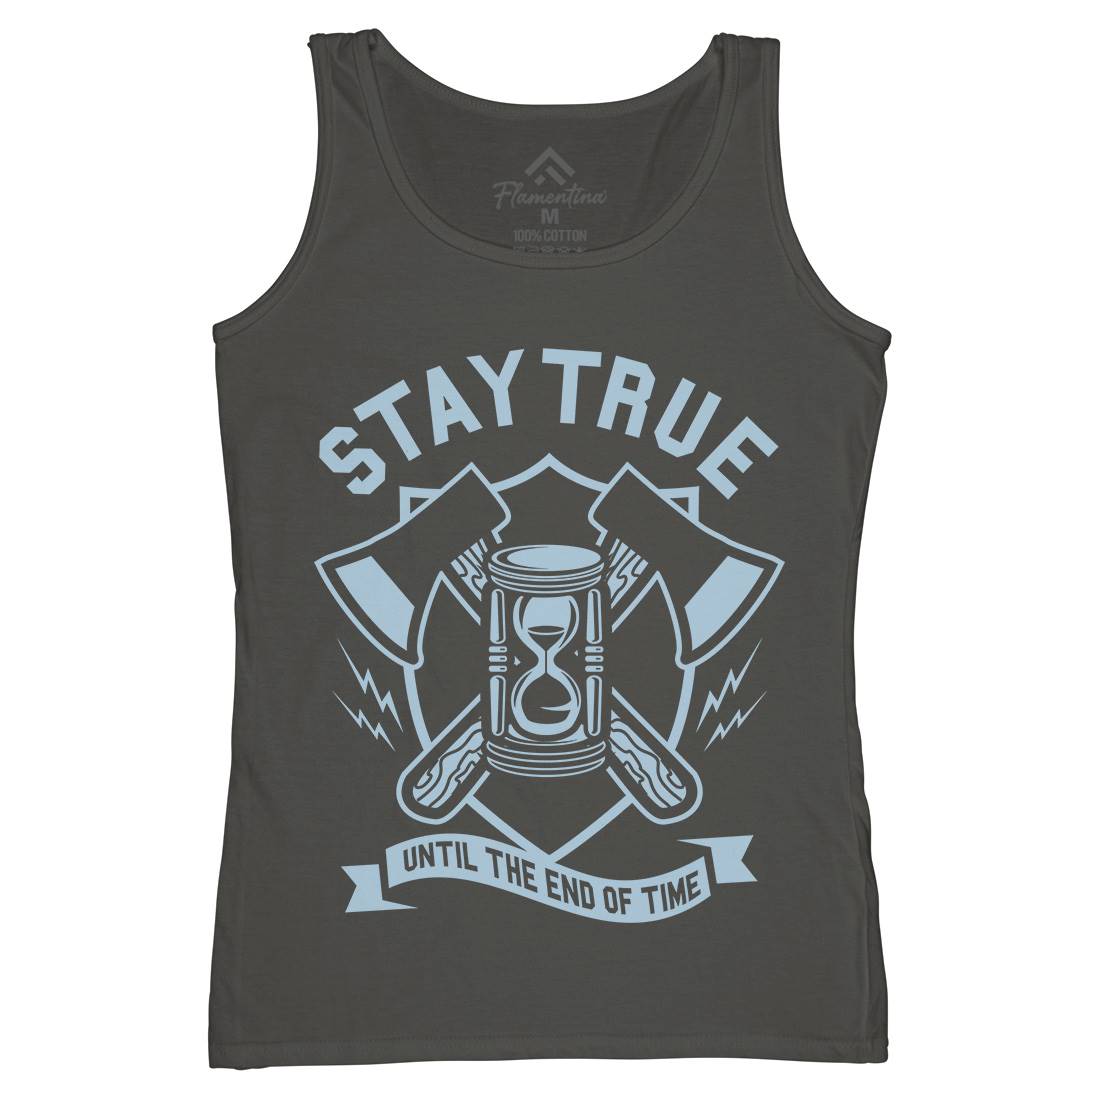 Stay True Womens Organic Tank Top Vest Quotes A285